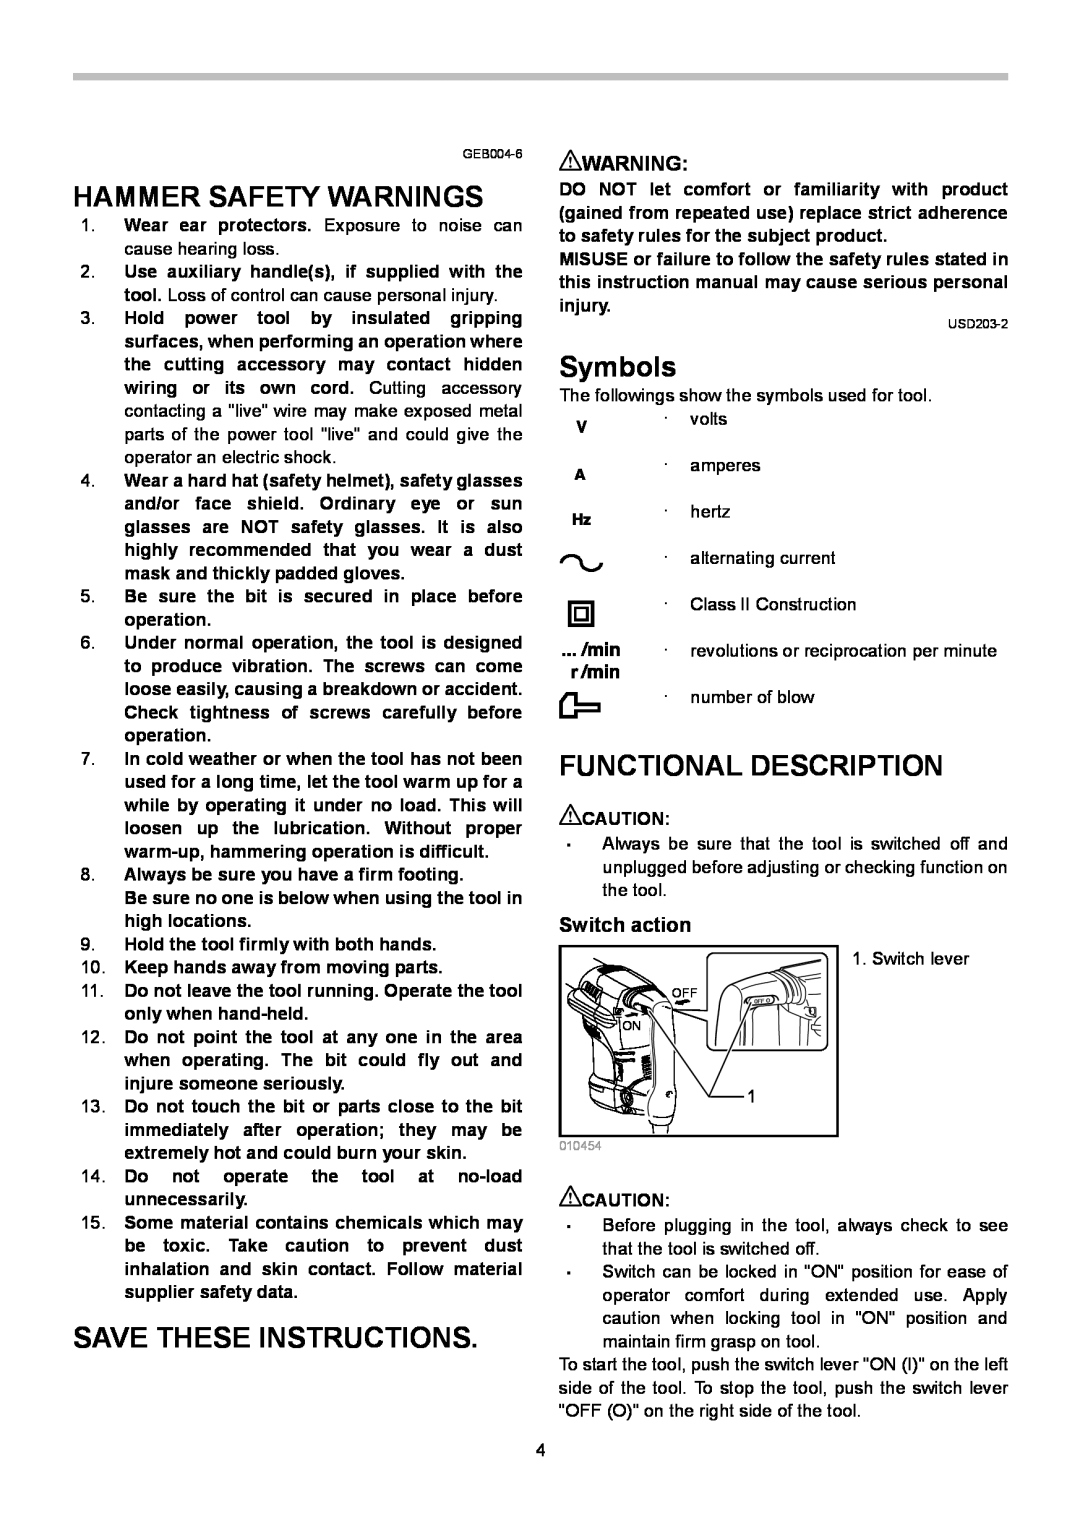 Makita HM0871C, HM0870C Hammer Safety Warnings, Symbols, Functional Description, Save These Instructions, Switch action 